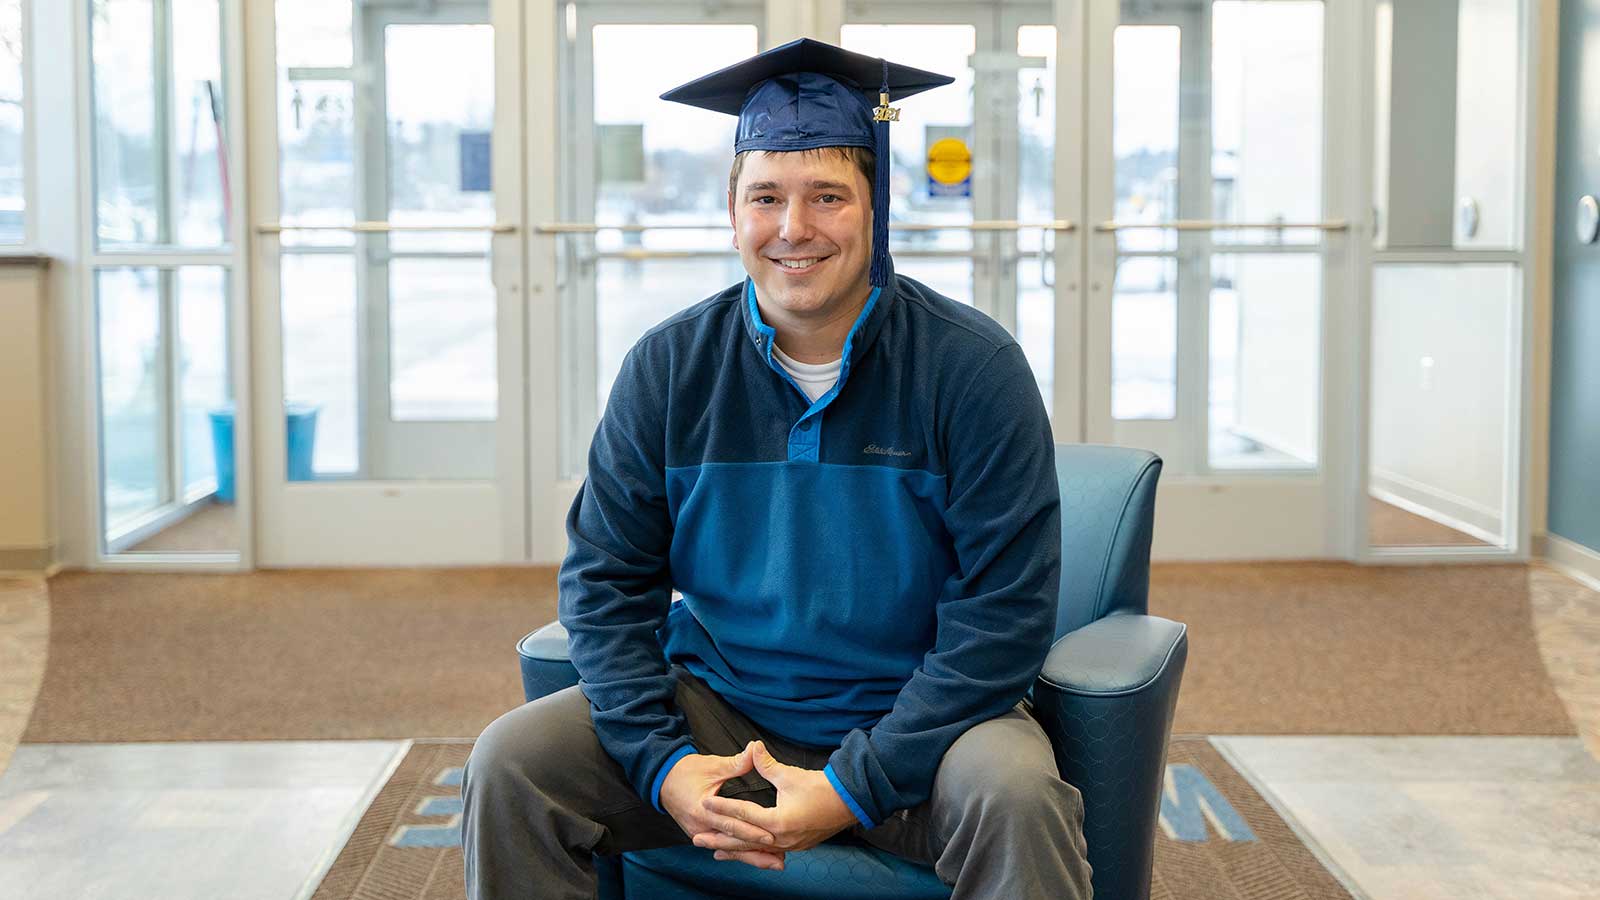 Zachary sitting in a chair while wearing a graduation cap, near the main entrance of the NTC Wausau campus.